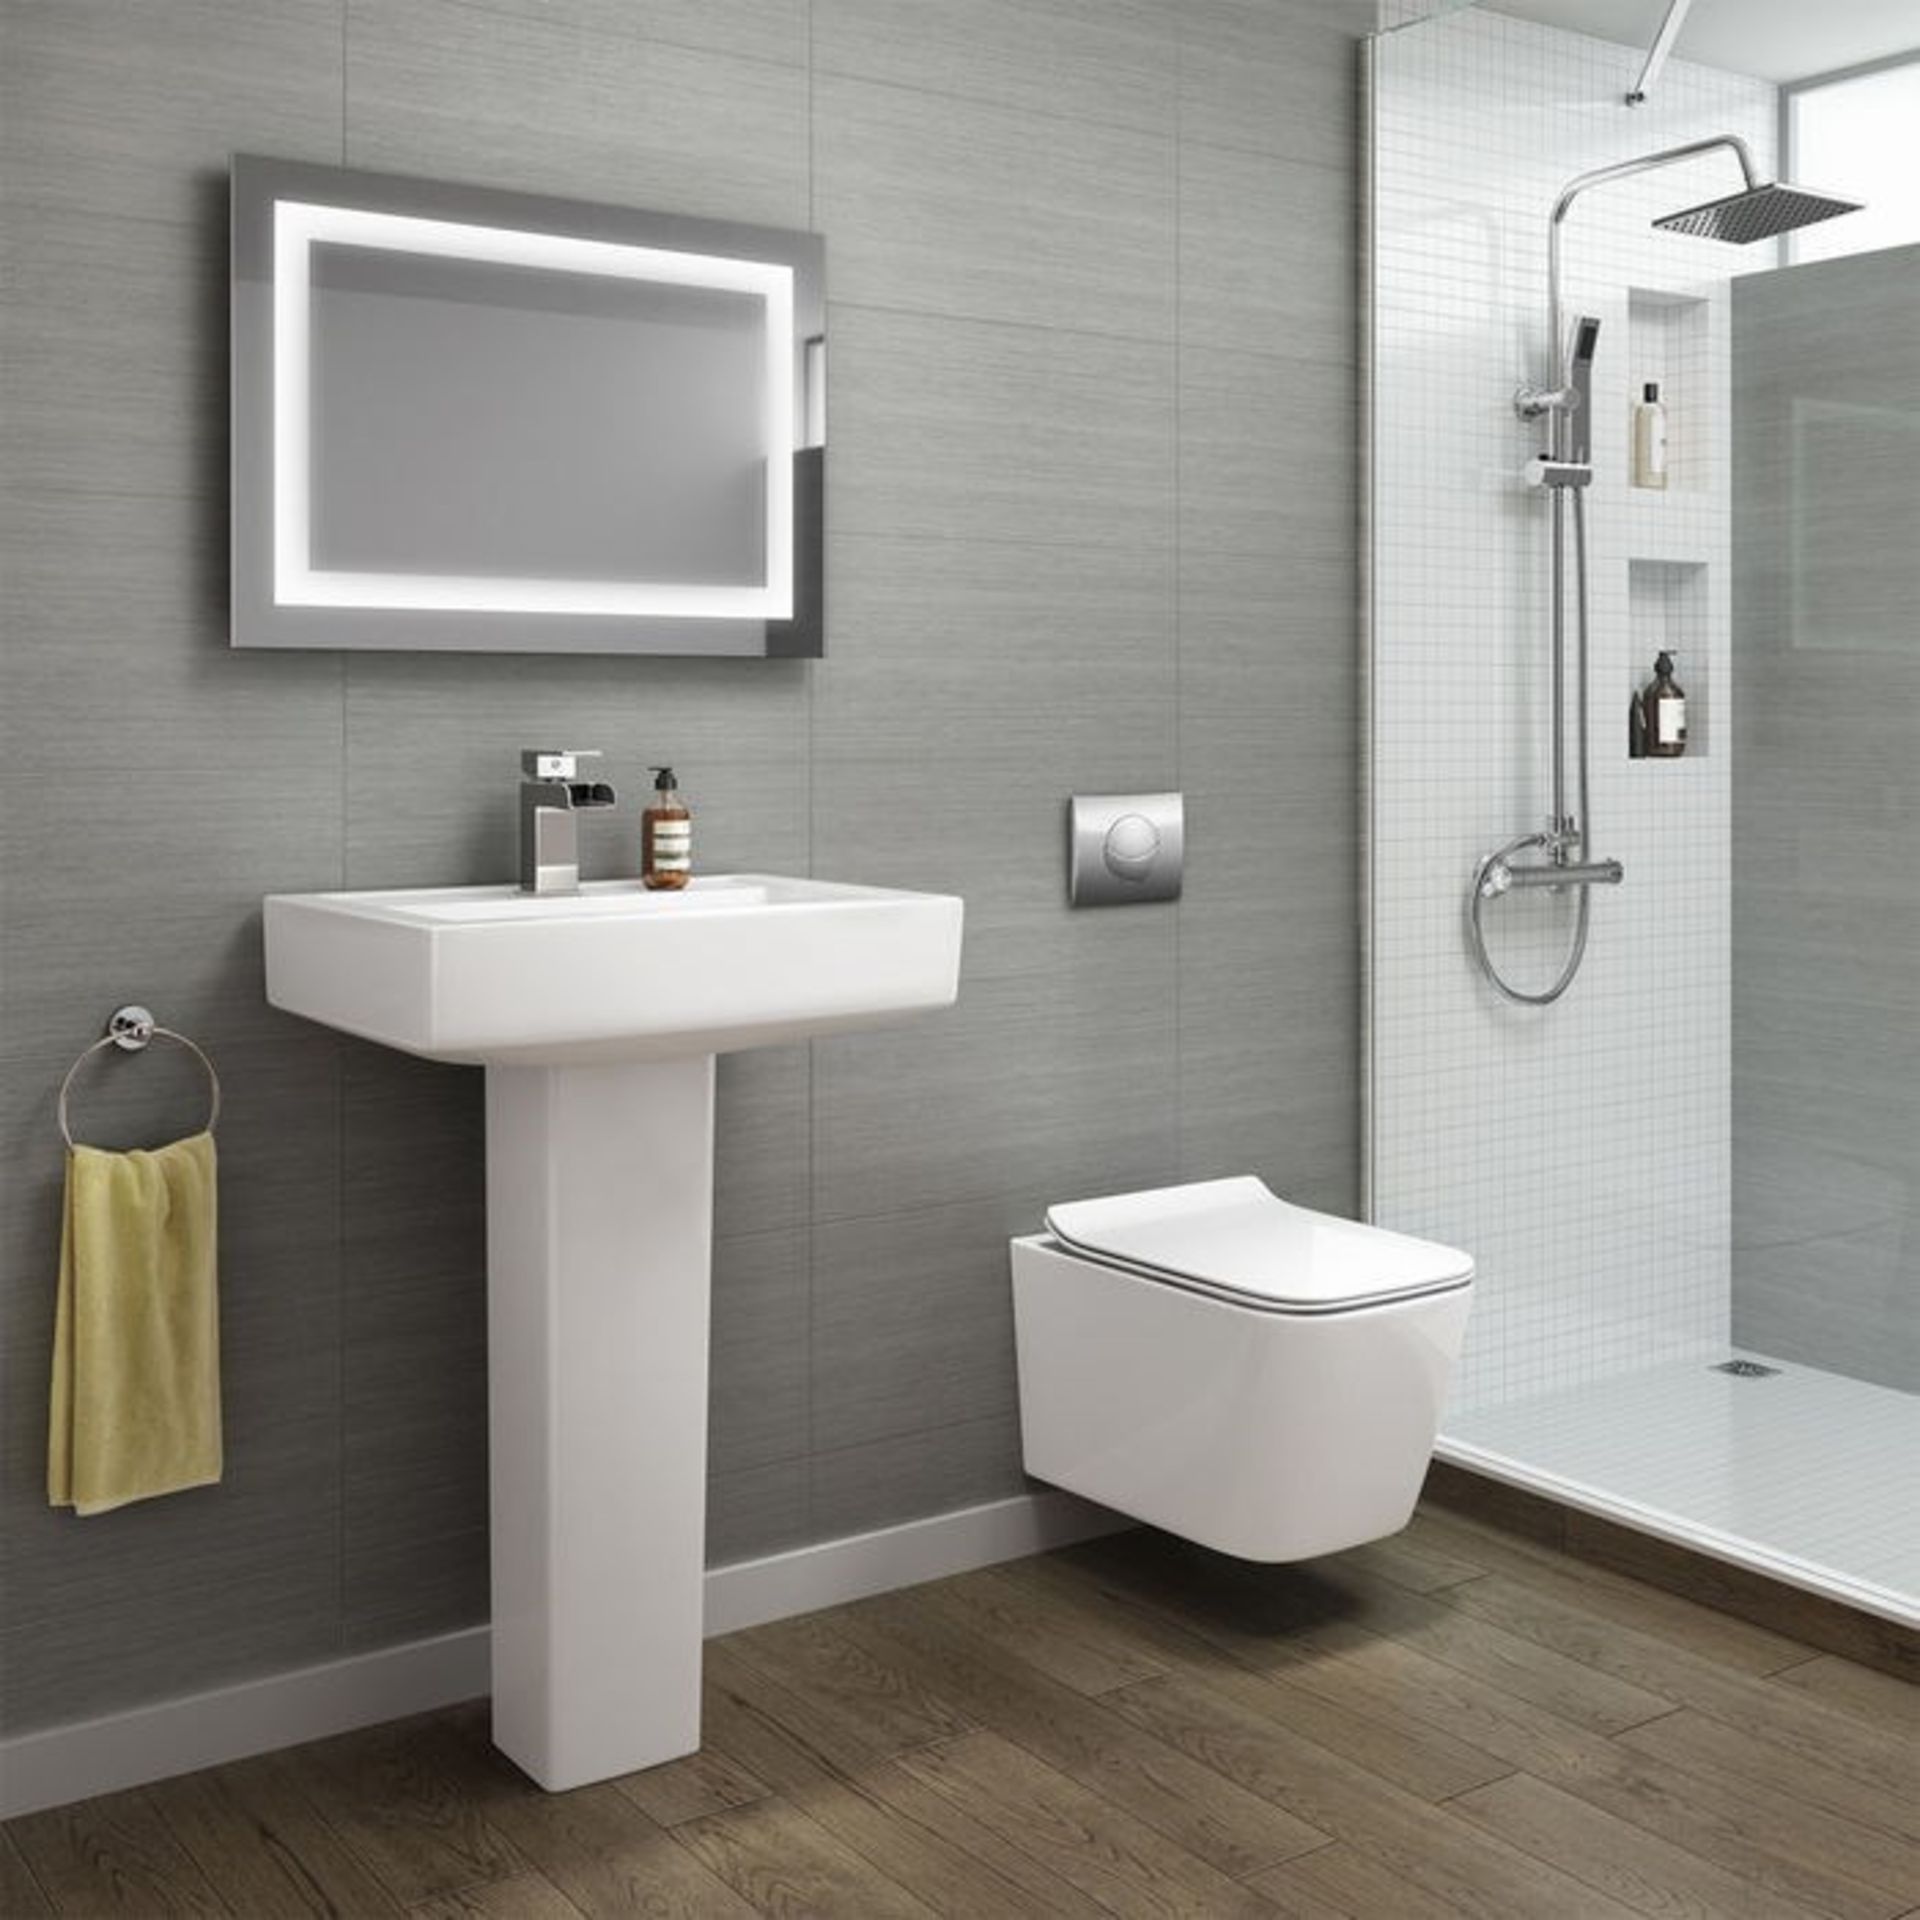 Florence Wall Hung Toilet inc Luxury Soft Close Seat. RRP £349.99 each.Made from White Vitreo... - Image 2 of 2